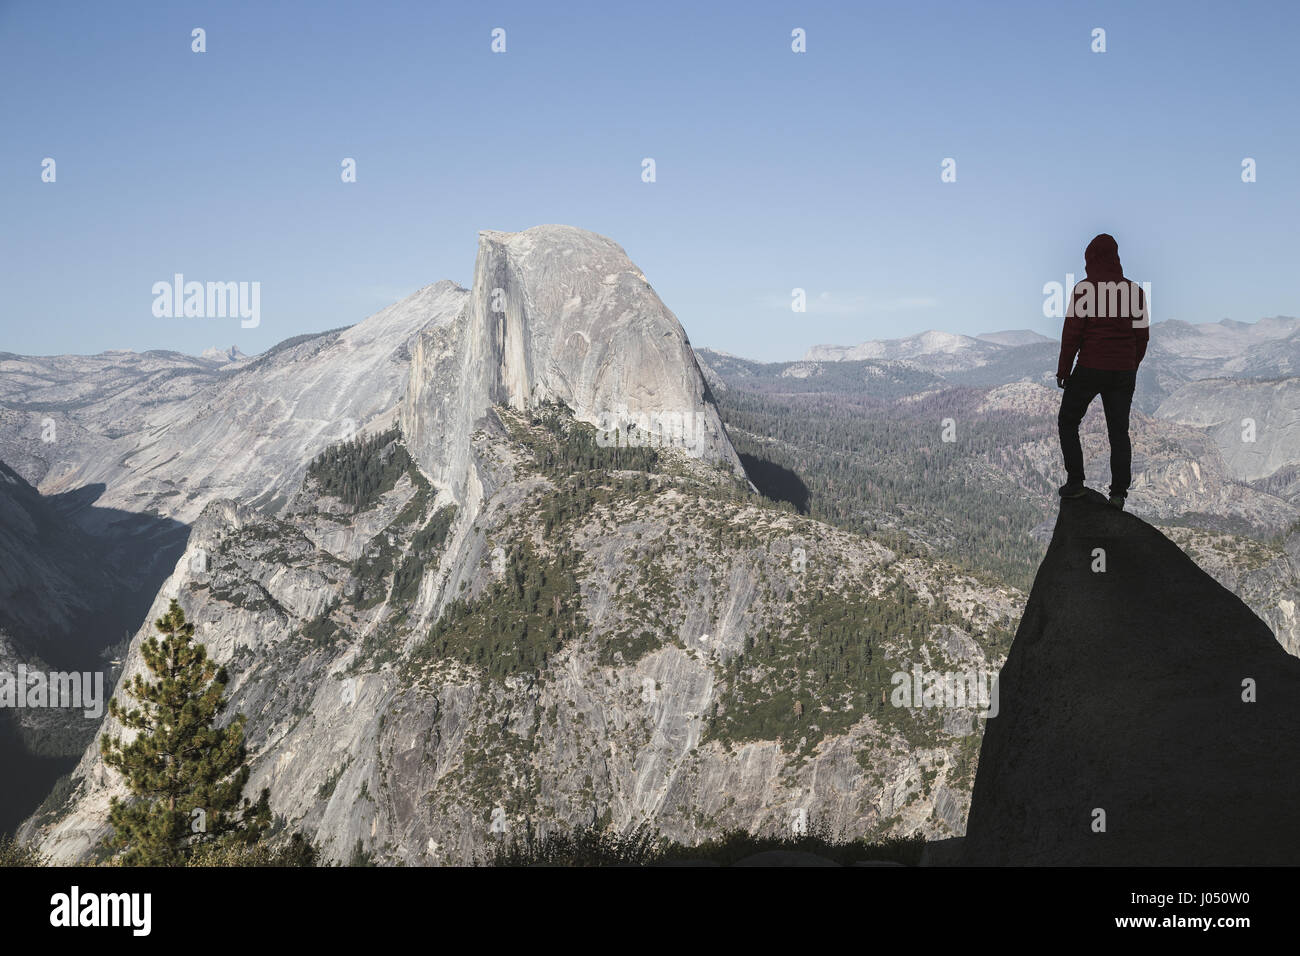 A young hiker is standing on a rock enjoying the view towards famous Half Dome at Glacier Point at sunset, Yosemite National Park, California, USA Stock Photo